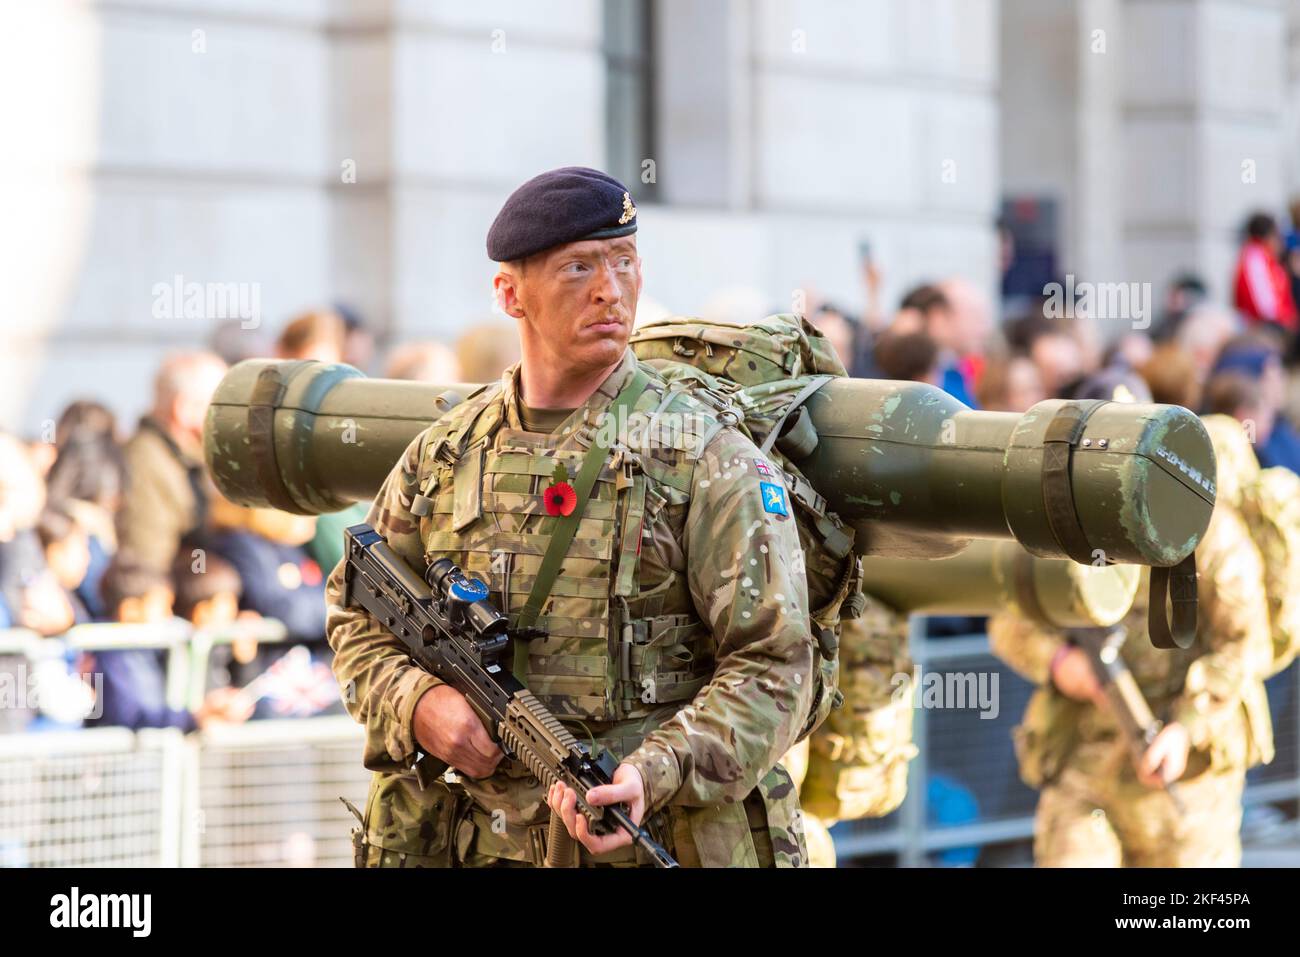 106 (Yeomanry) Regiment Royal Artillery at the Lord Mayor's Show parade in the City of London, UK. Starstreak HVM (High Velocity Missile) Stock Photo